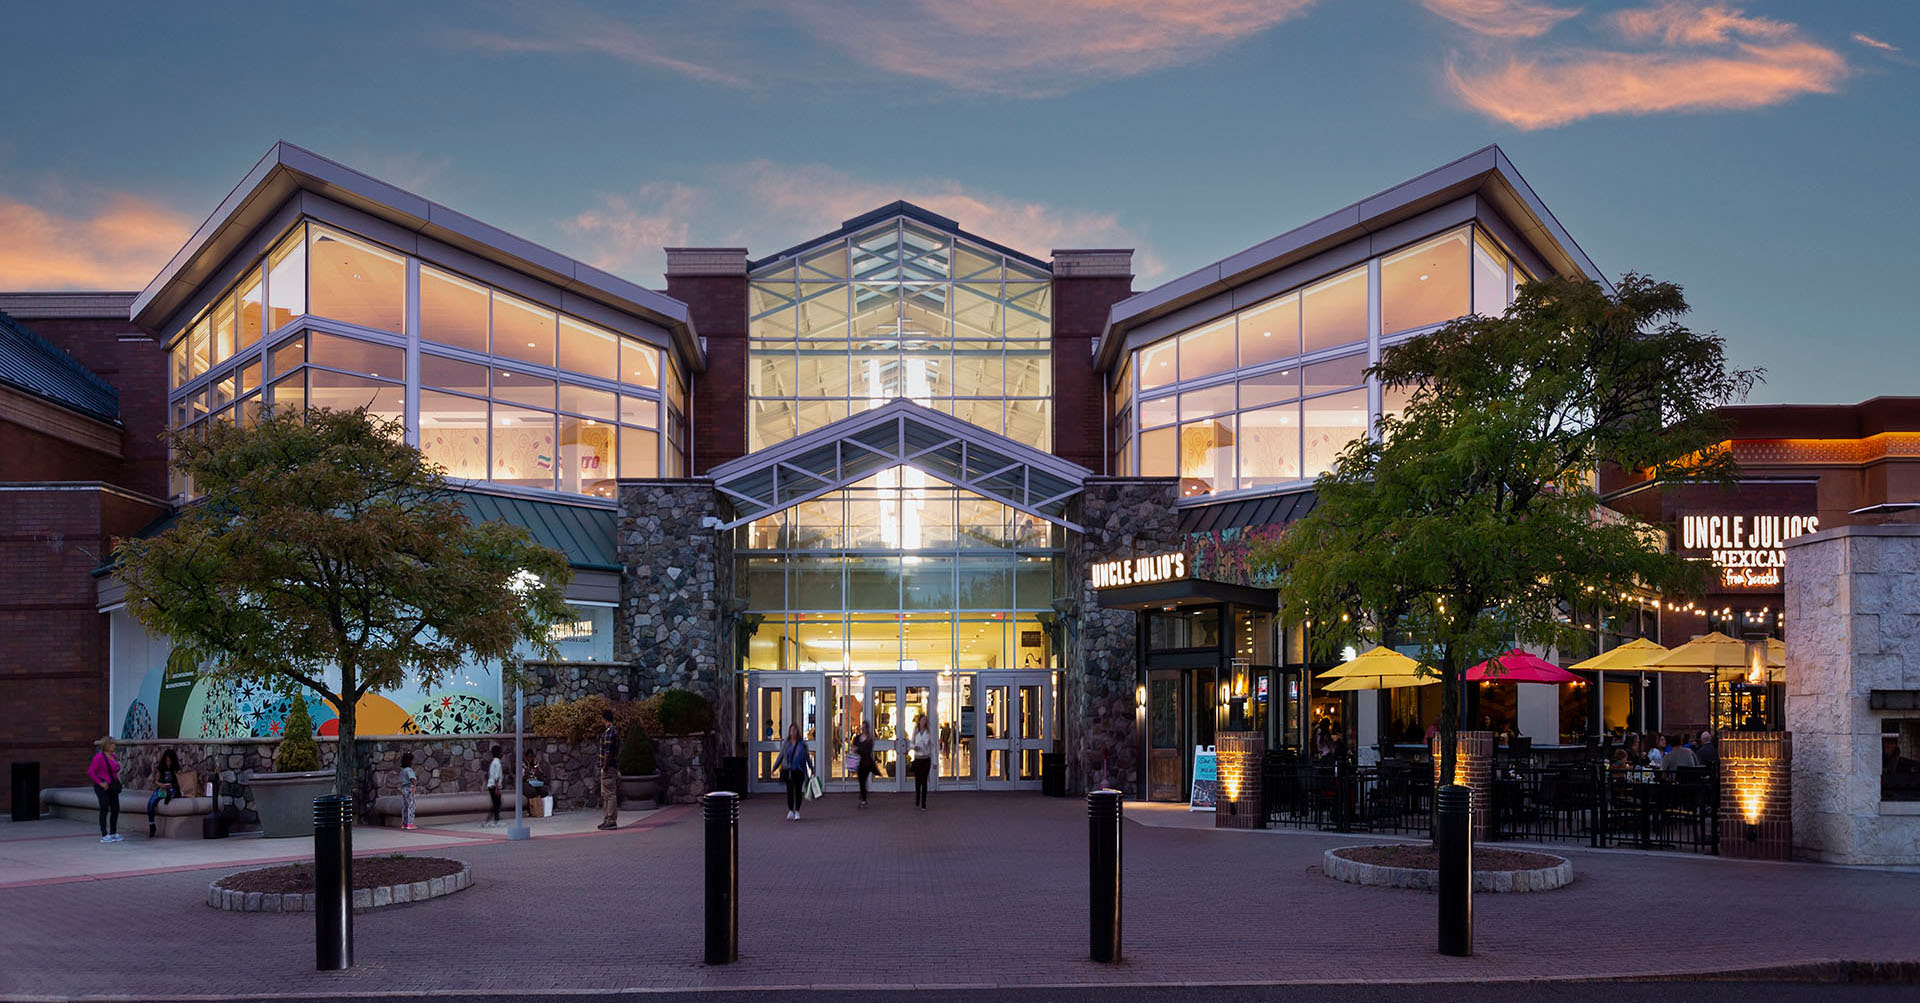 Northpark - Pacific Retail Capital Partners